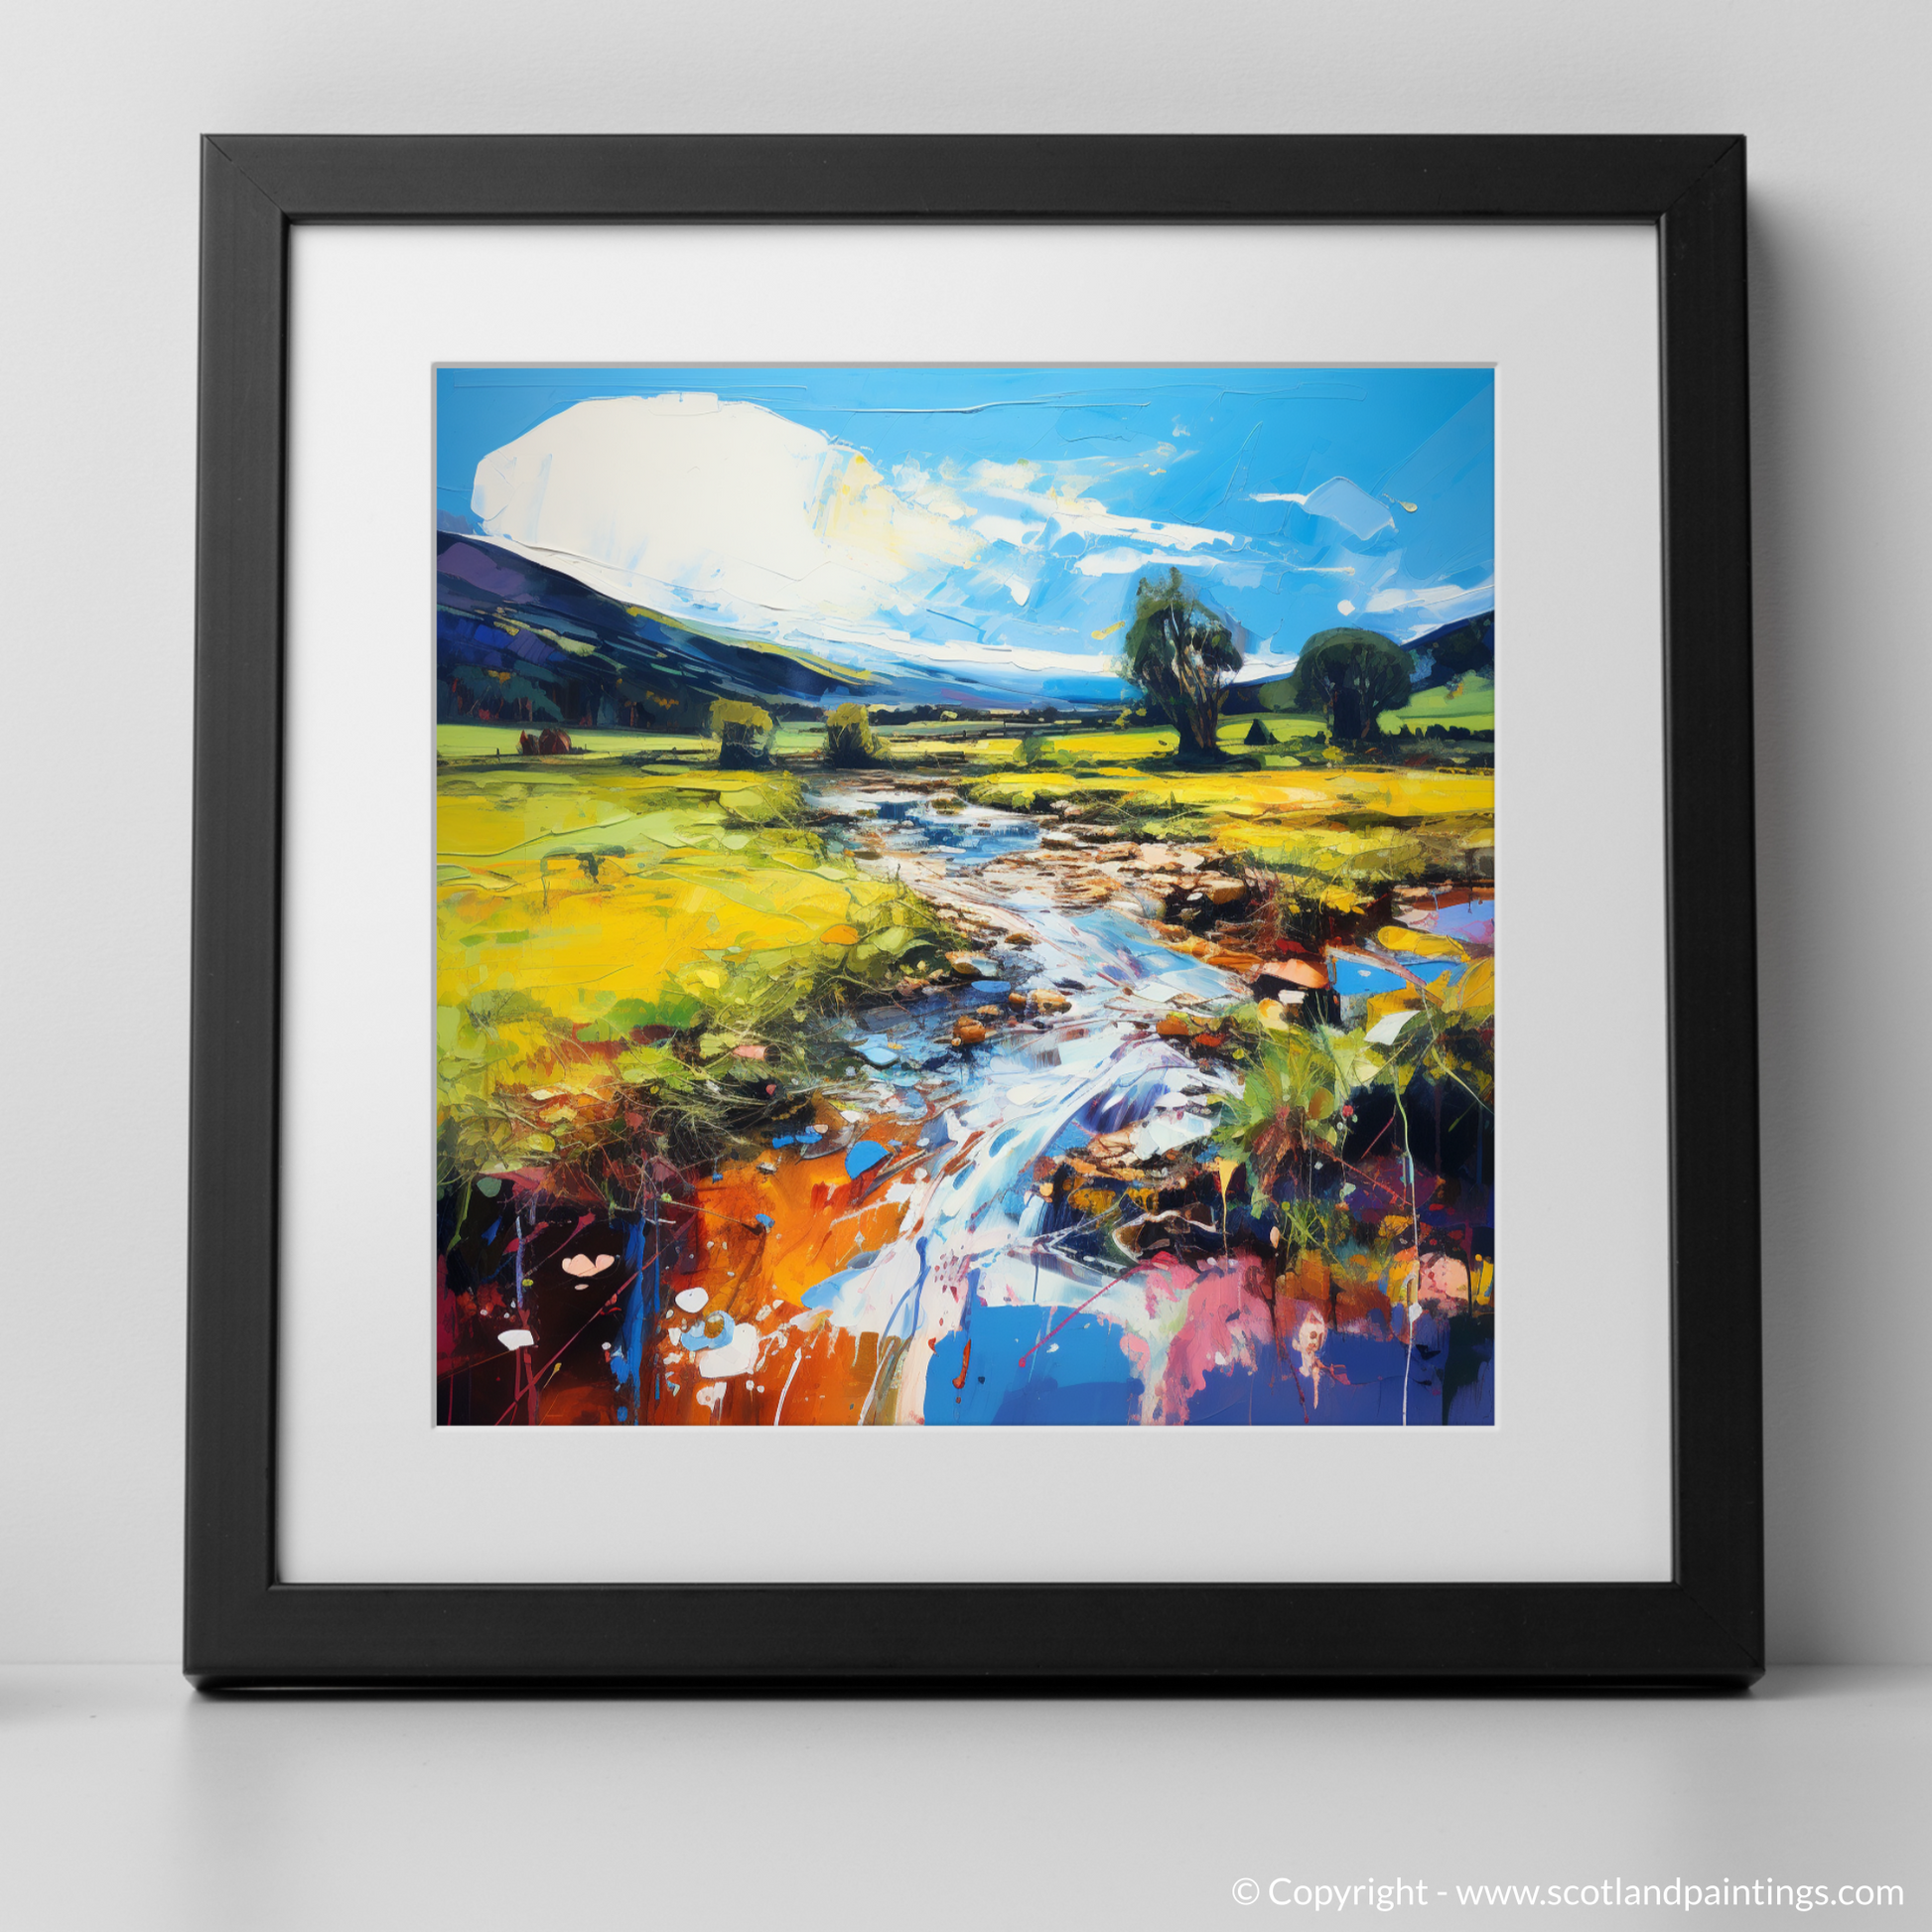 Art Print of Glen Esk, Angus in summer with a black frame